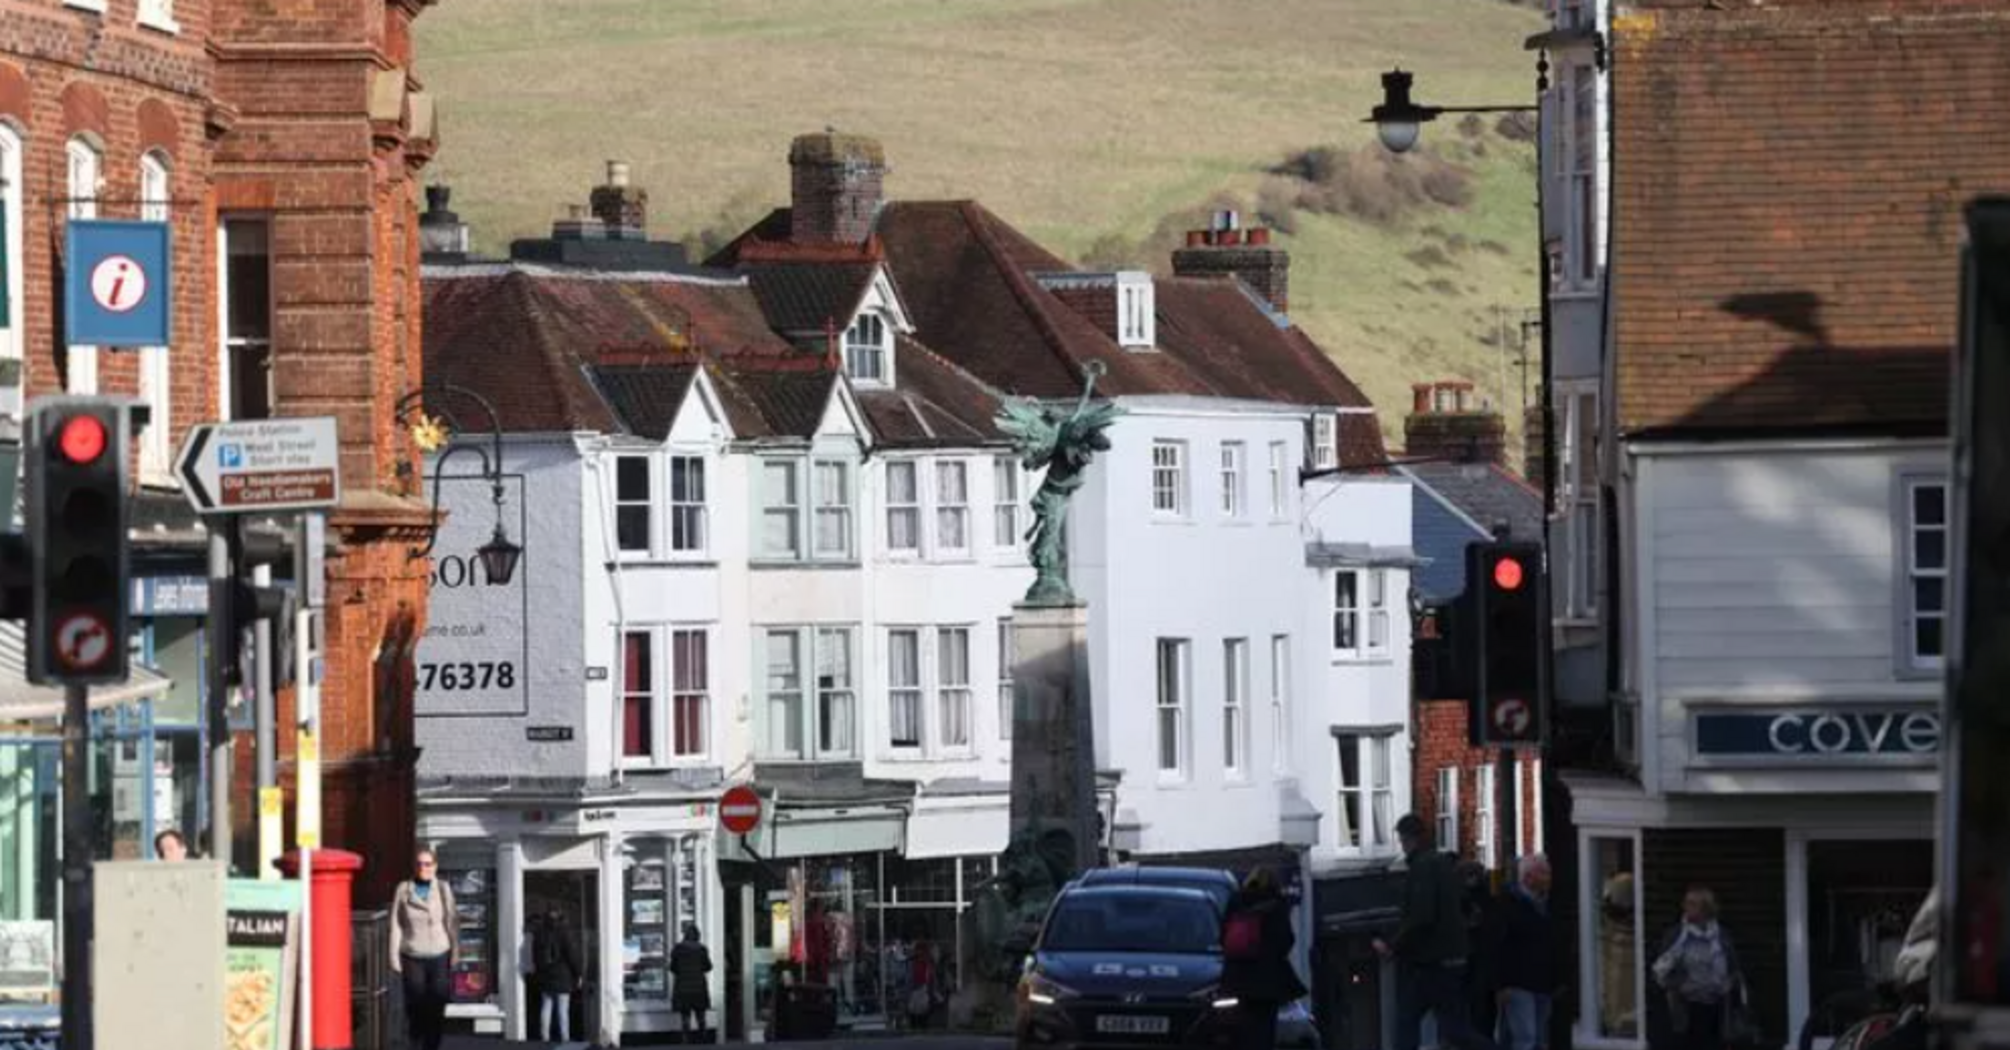 Lewes in East Sussex